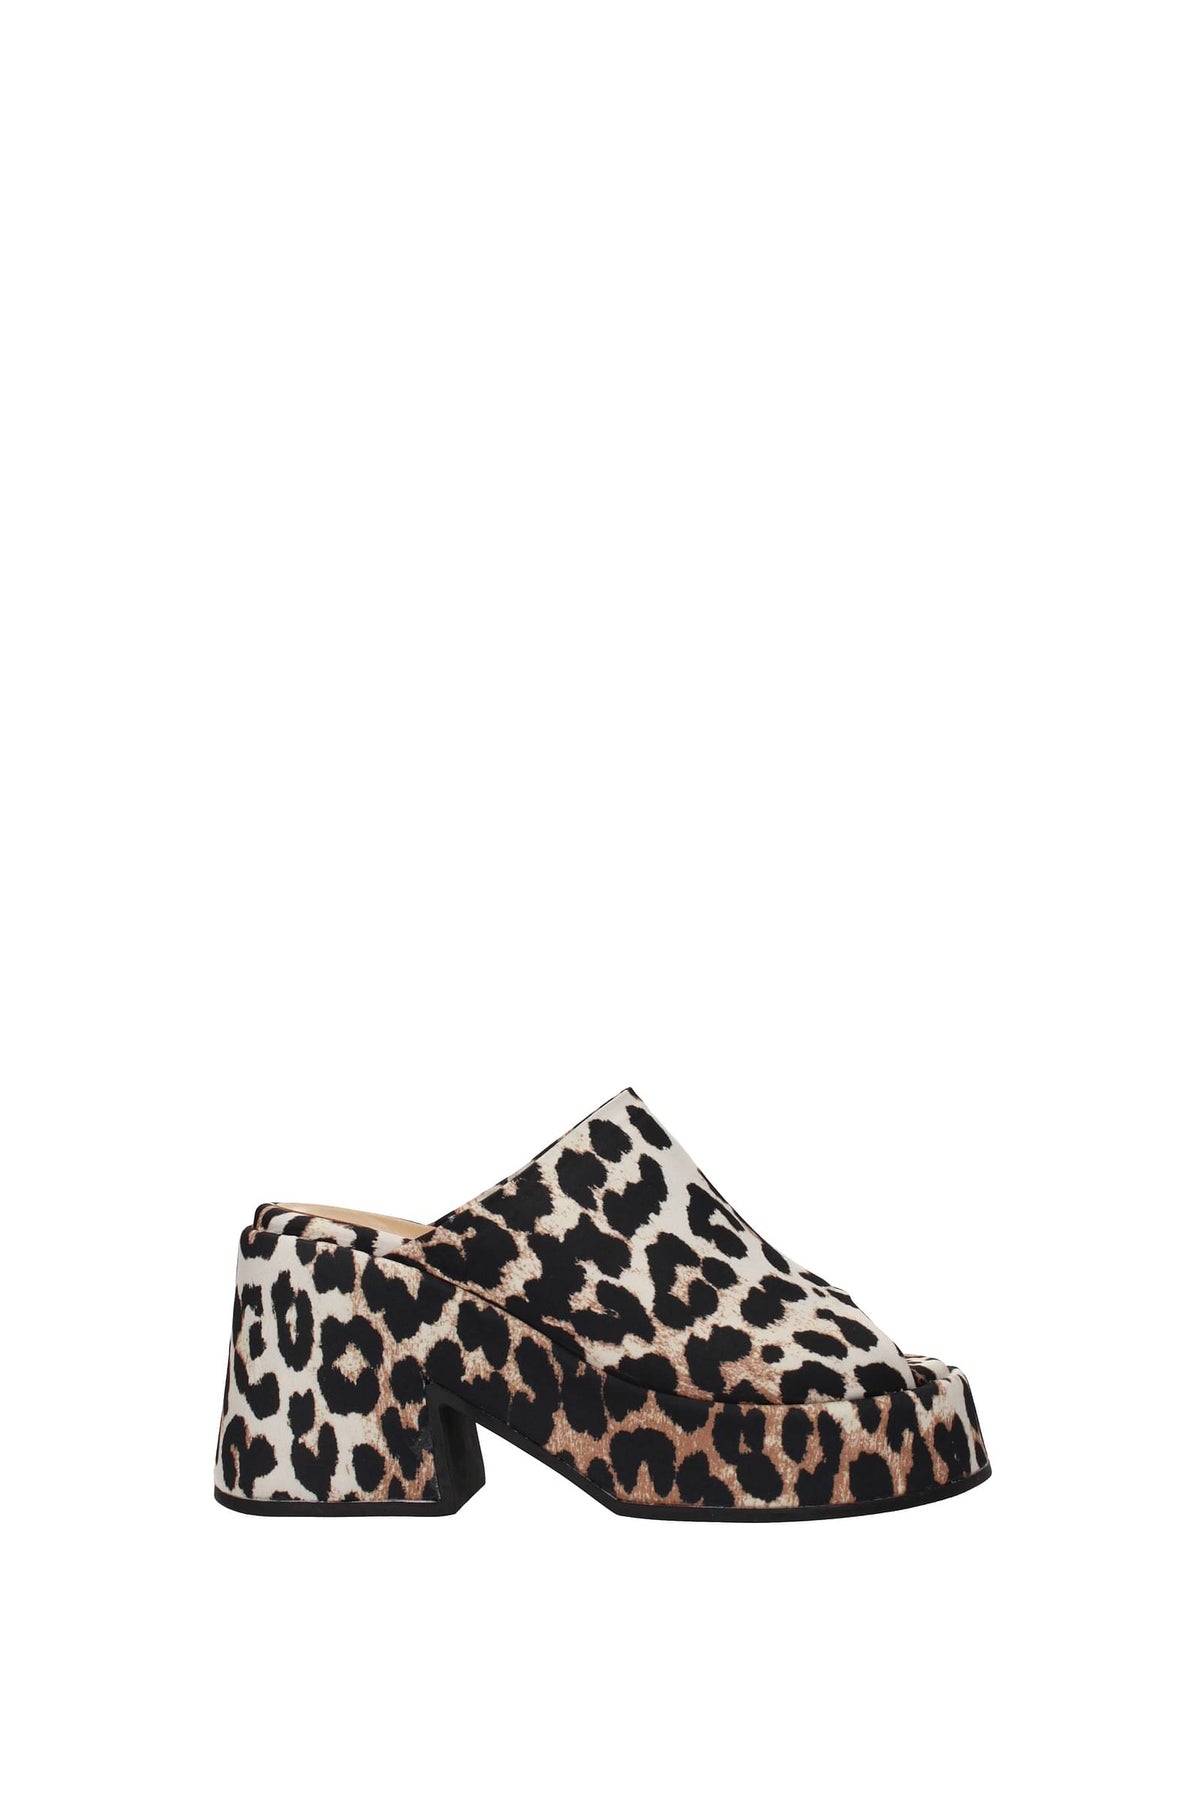 GANNI SLIPPERS AND CLOGS FABRIC BEIGE LEOPARD